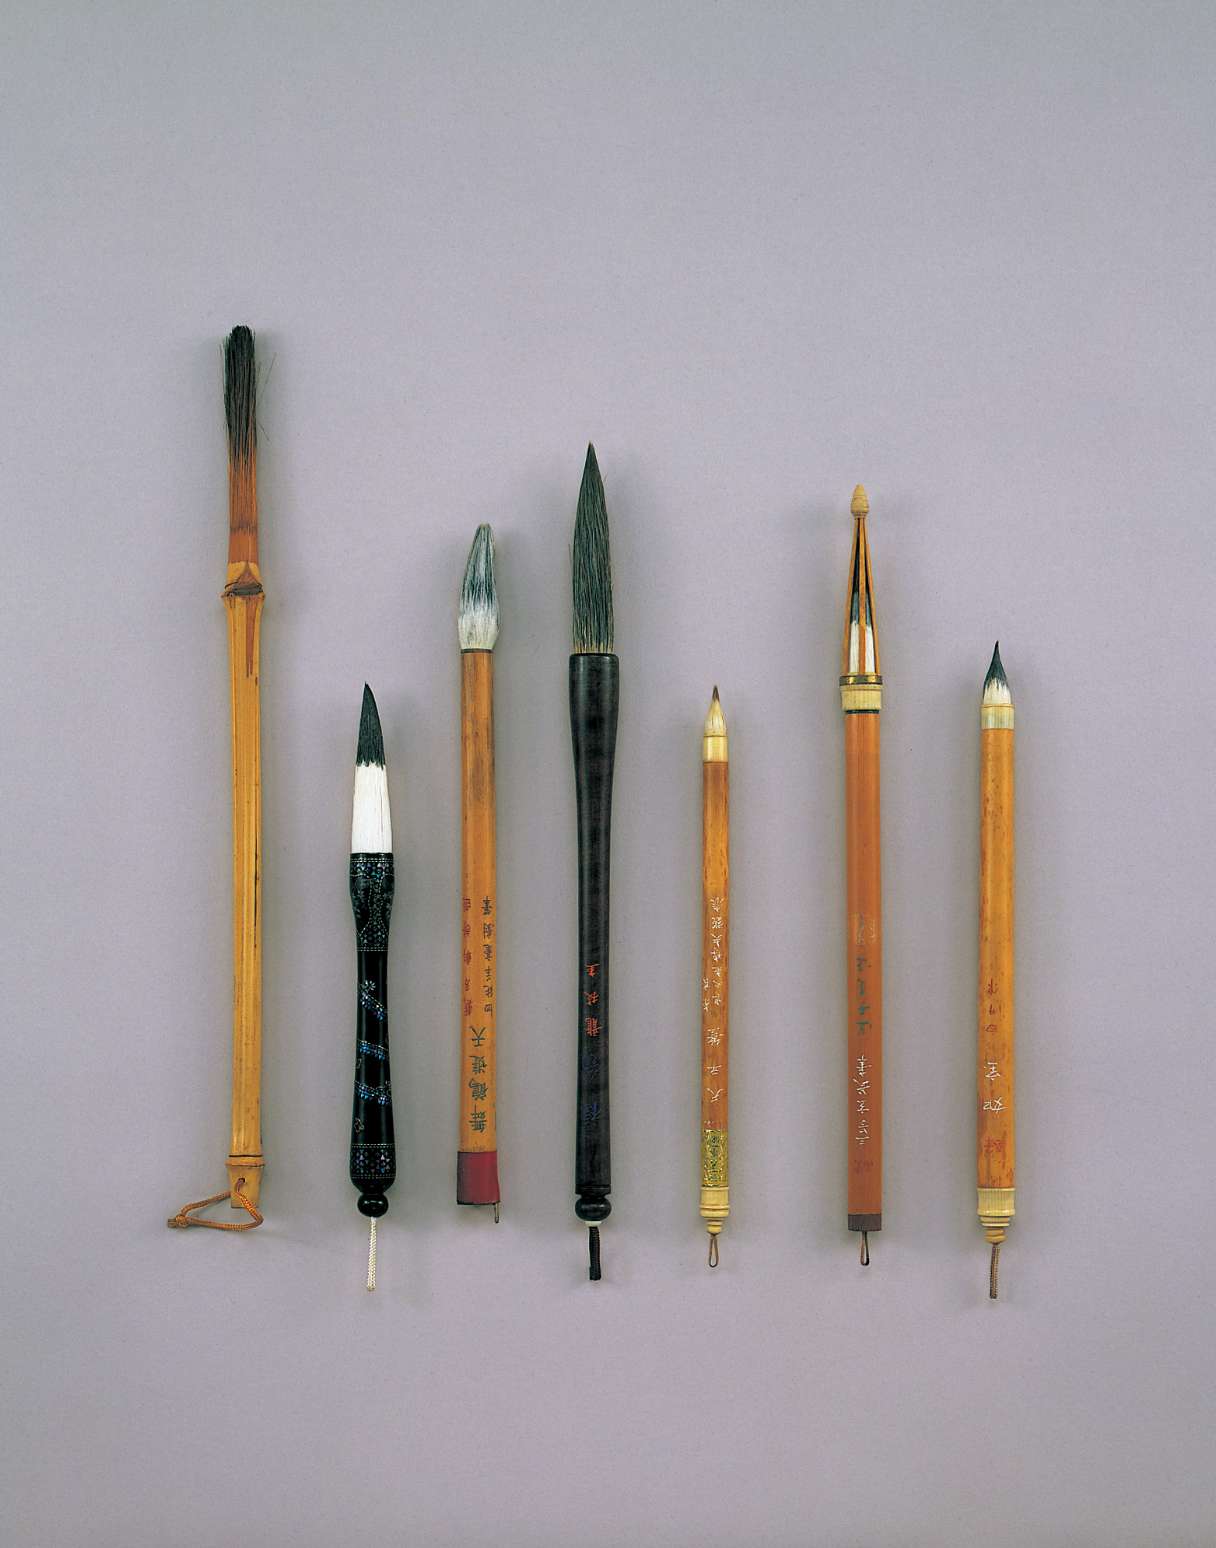 A color photograph depicts seven ink brushes of varying thickness and length, some bamboo, others of wood, marked with Japanese writing, neatly laid next to one another.